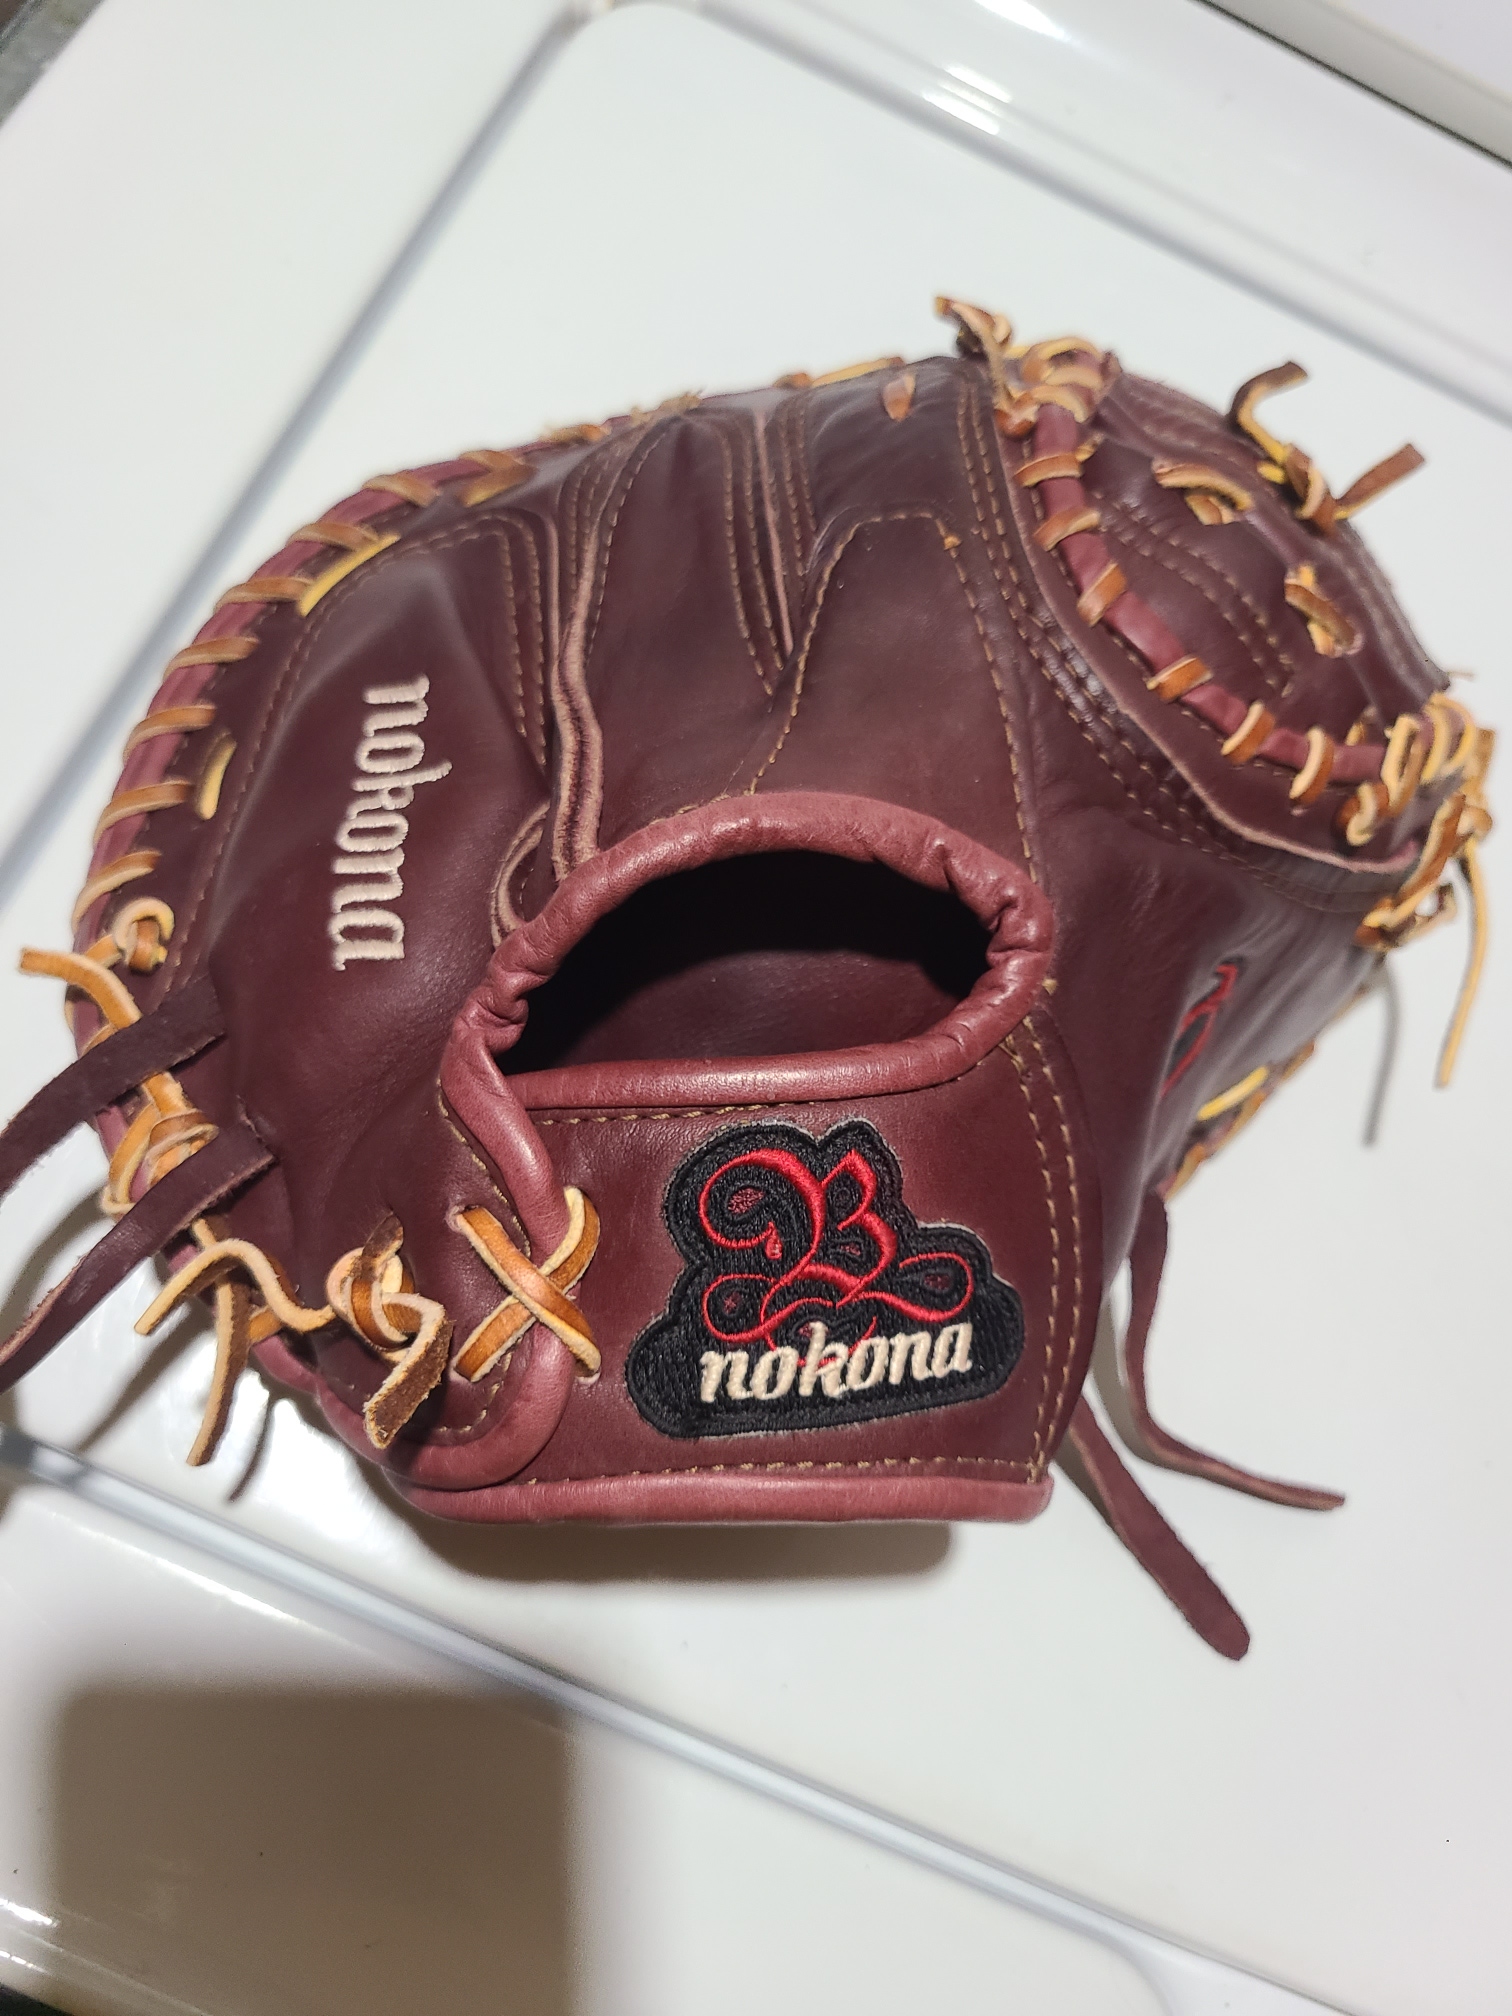 New without tags Nokona Right Hand Throw Catcher's Bloodline pro elite Baseball Glove 33"